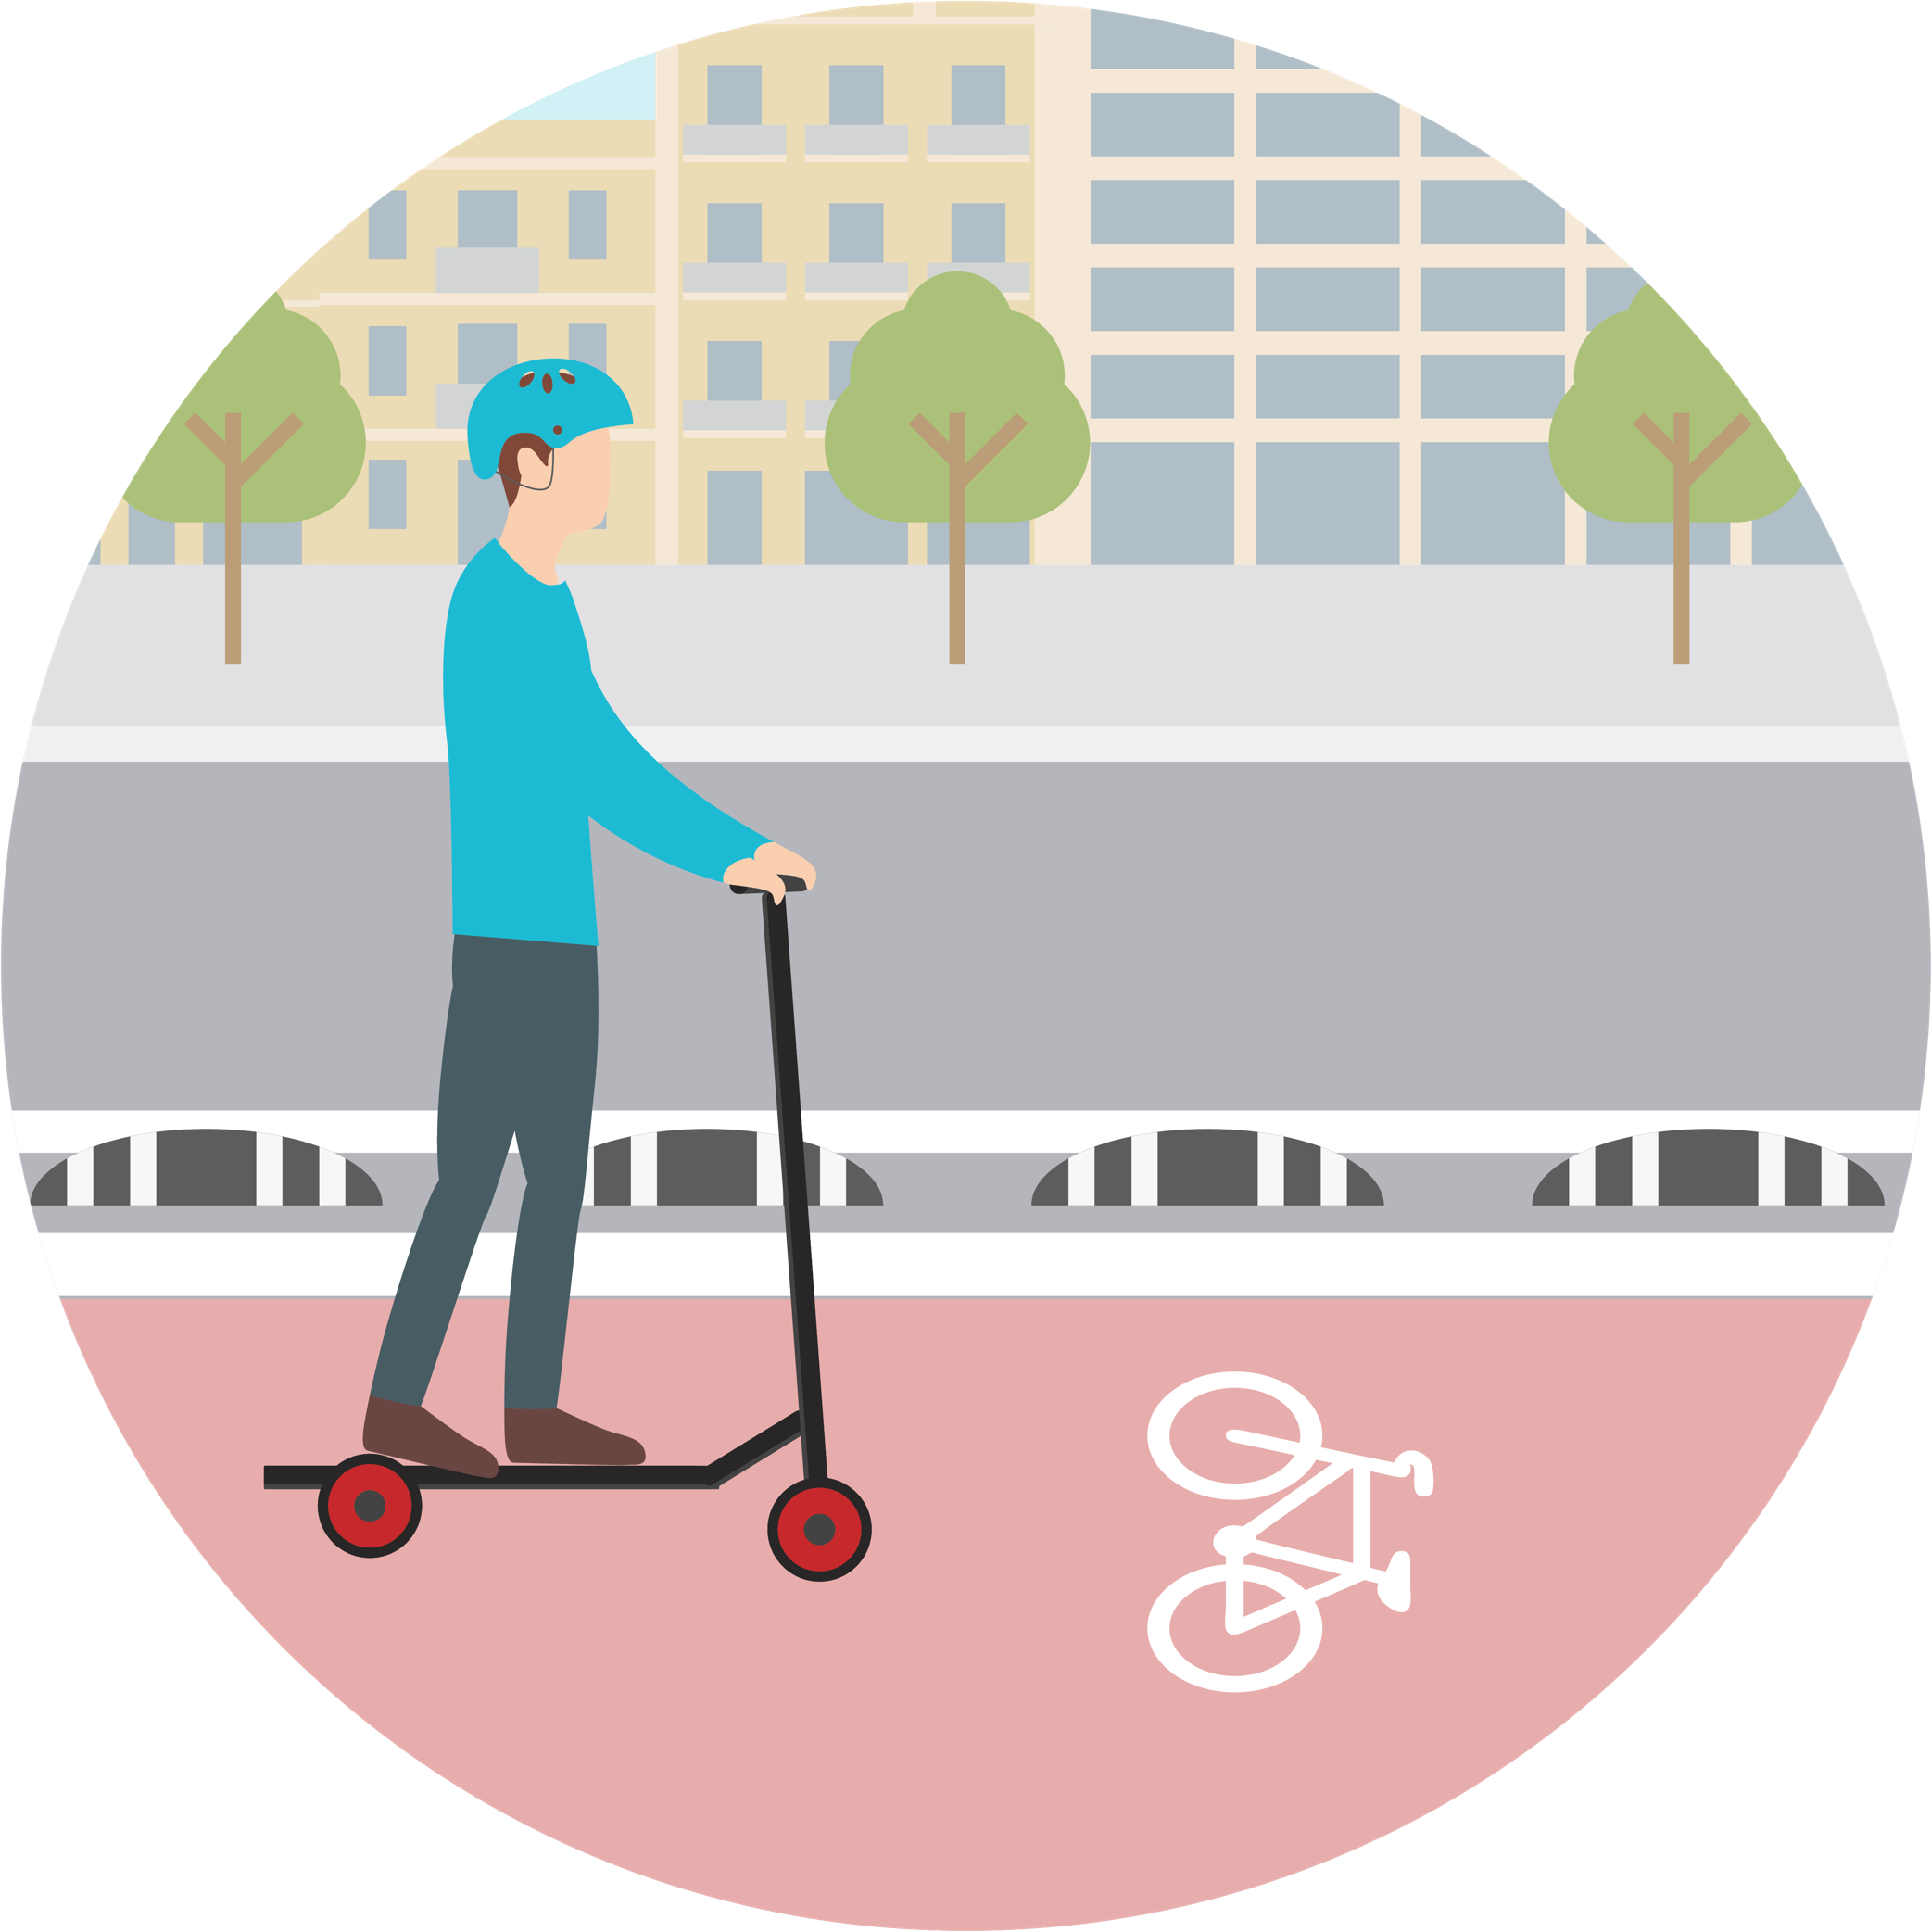 Can I ride electric scooters on the bike lanes in Barcelona?